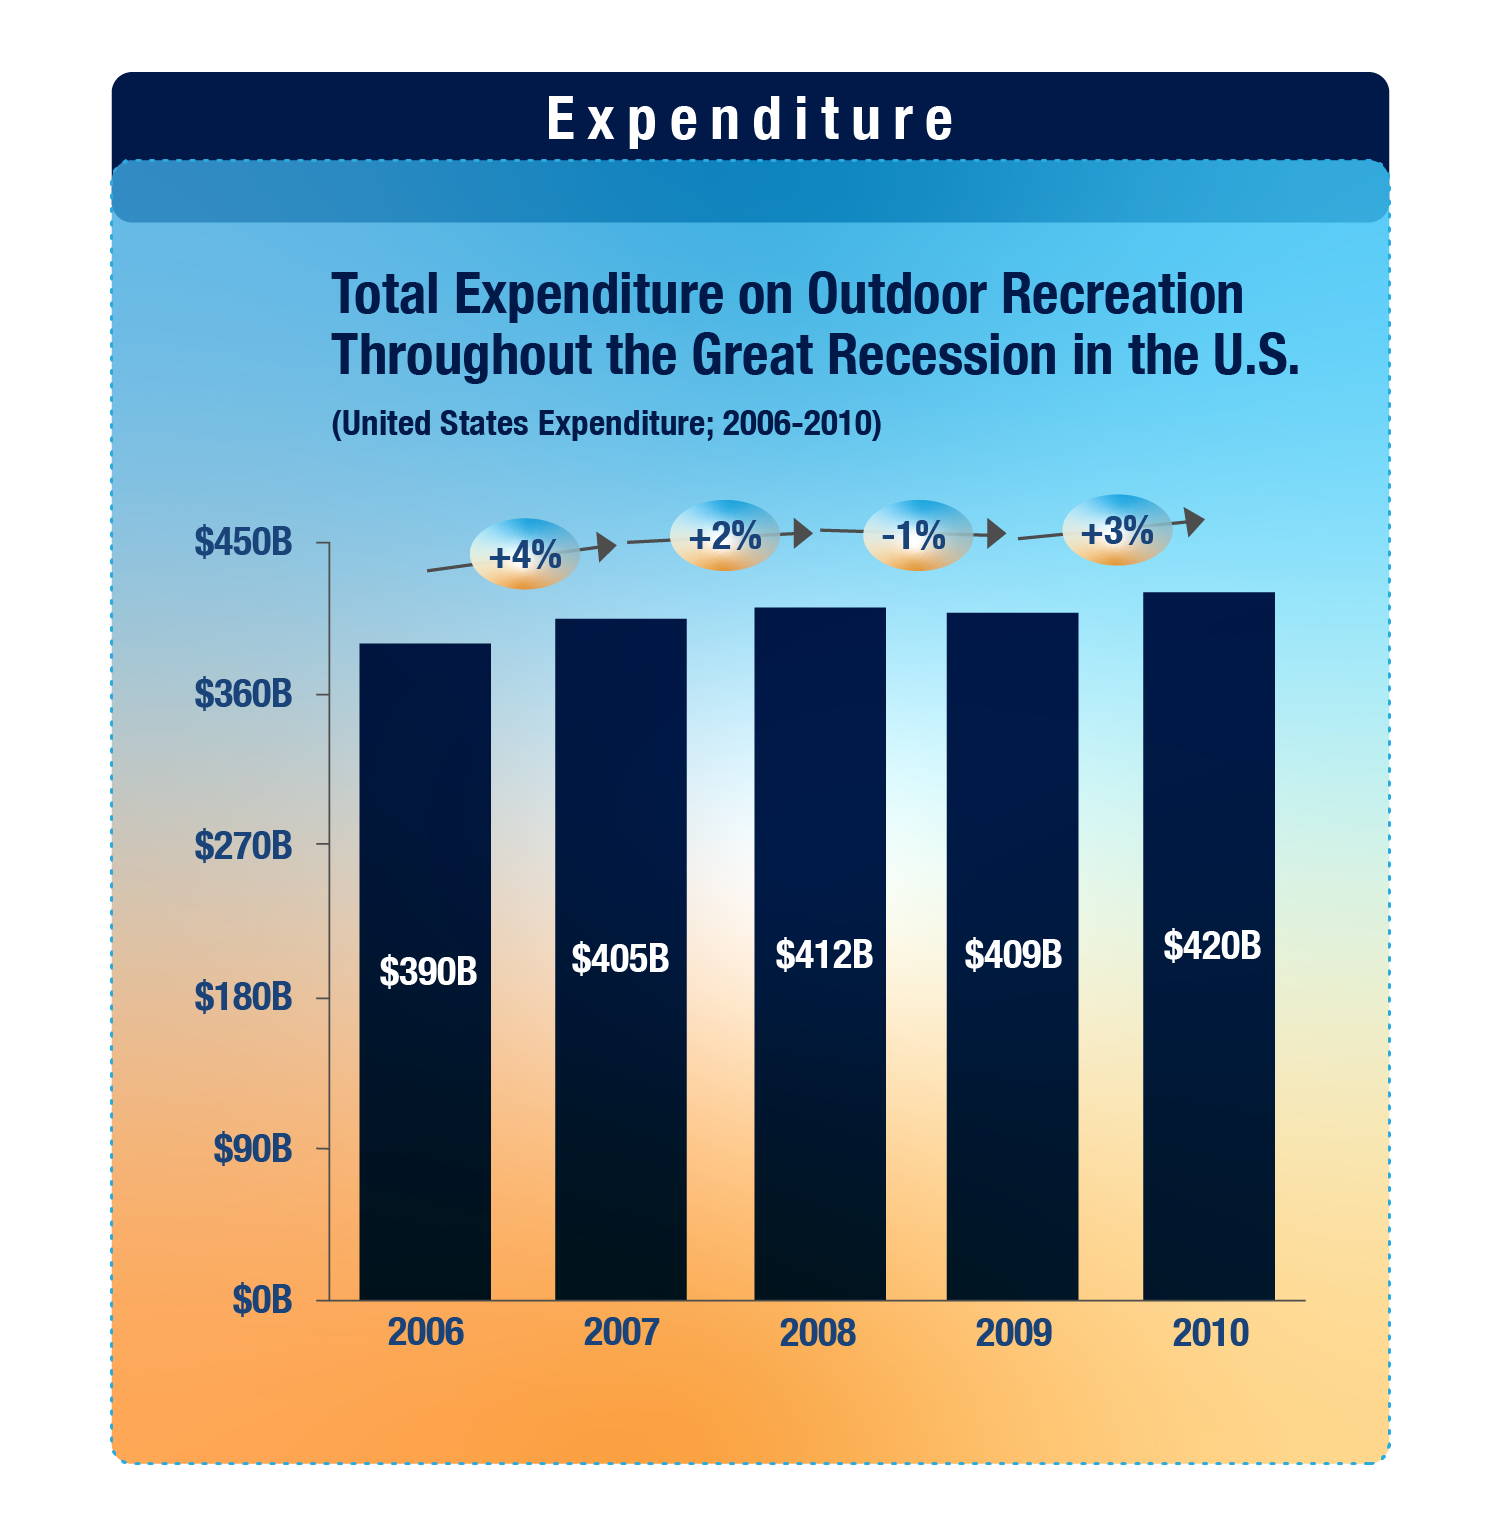 A bar chart showing total expenditure on outdoor recreation throughout the great recession in the US from 2006-2010. With a slight dip between 2008-2009, trends show upwards growth. 